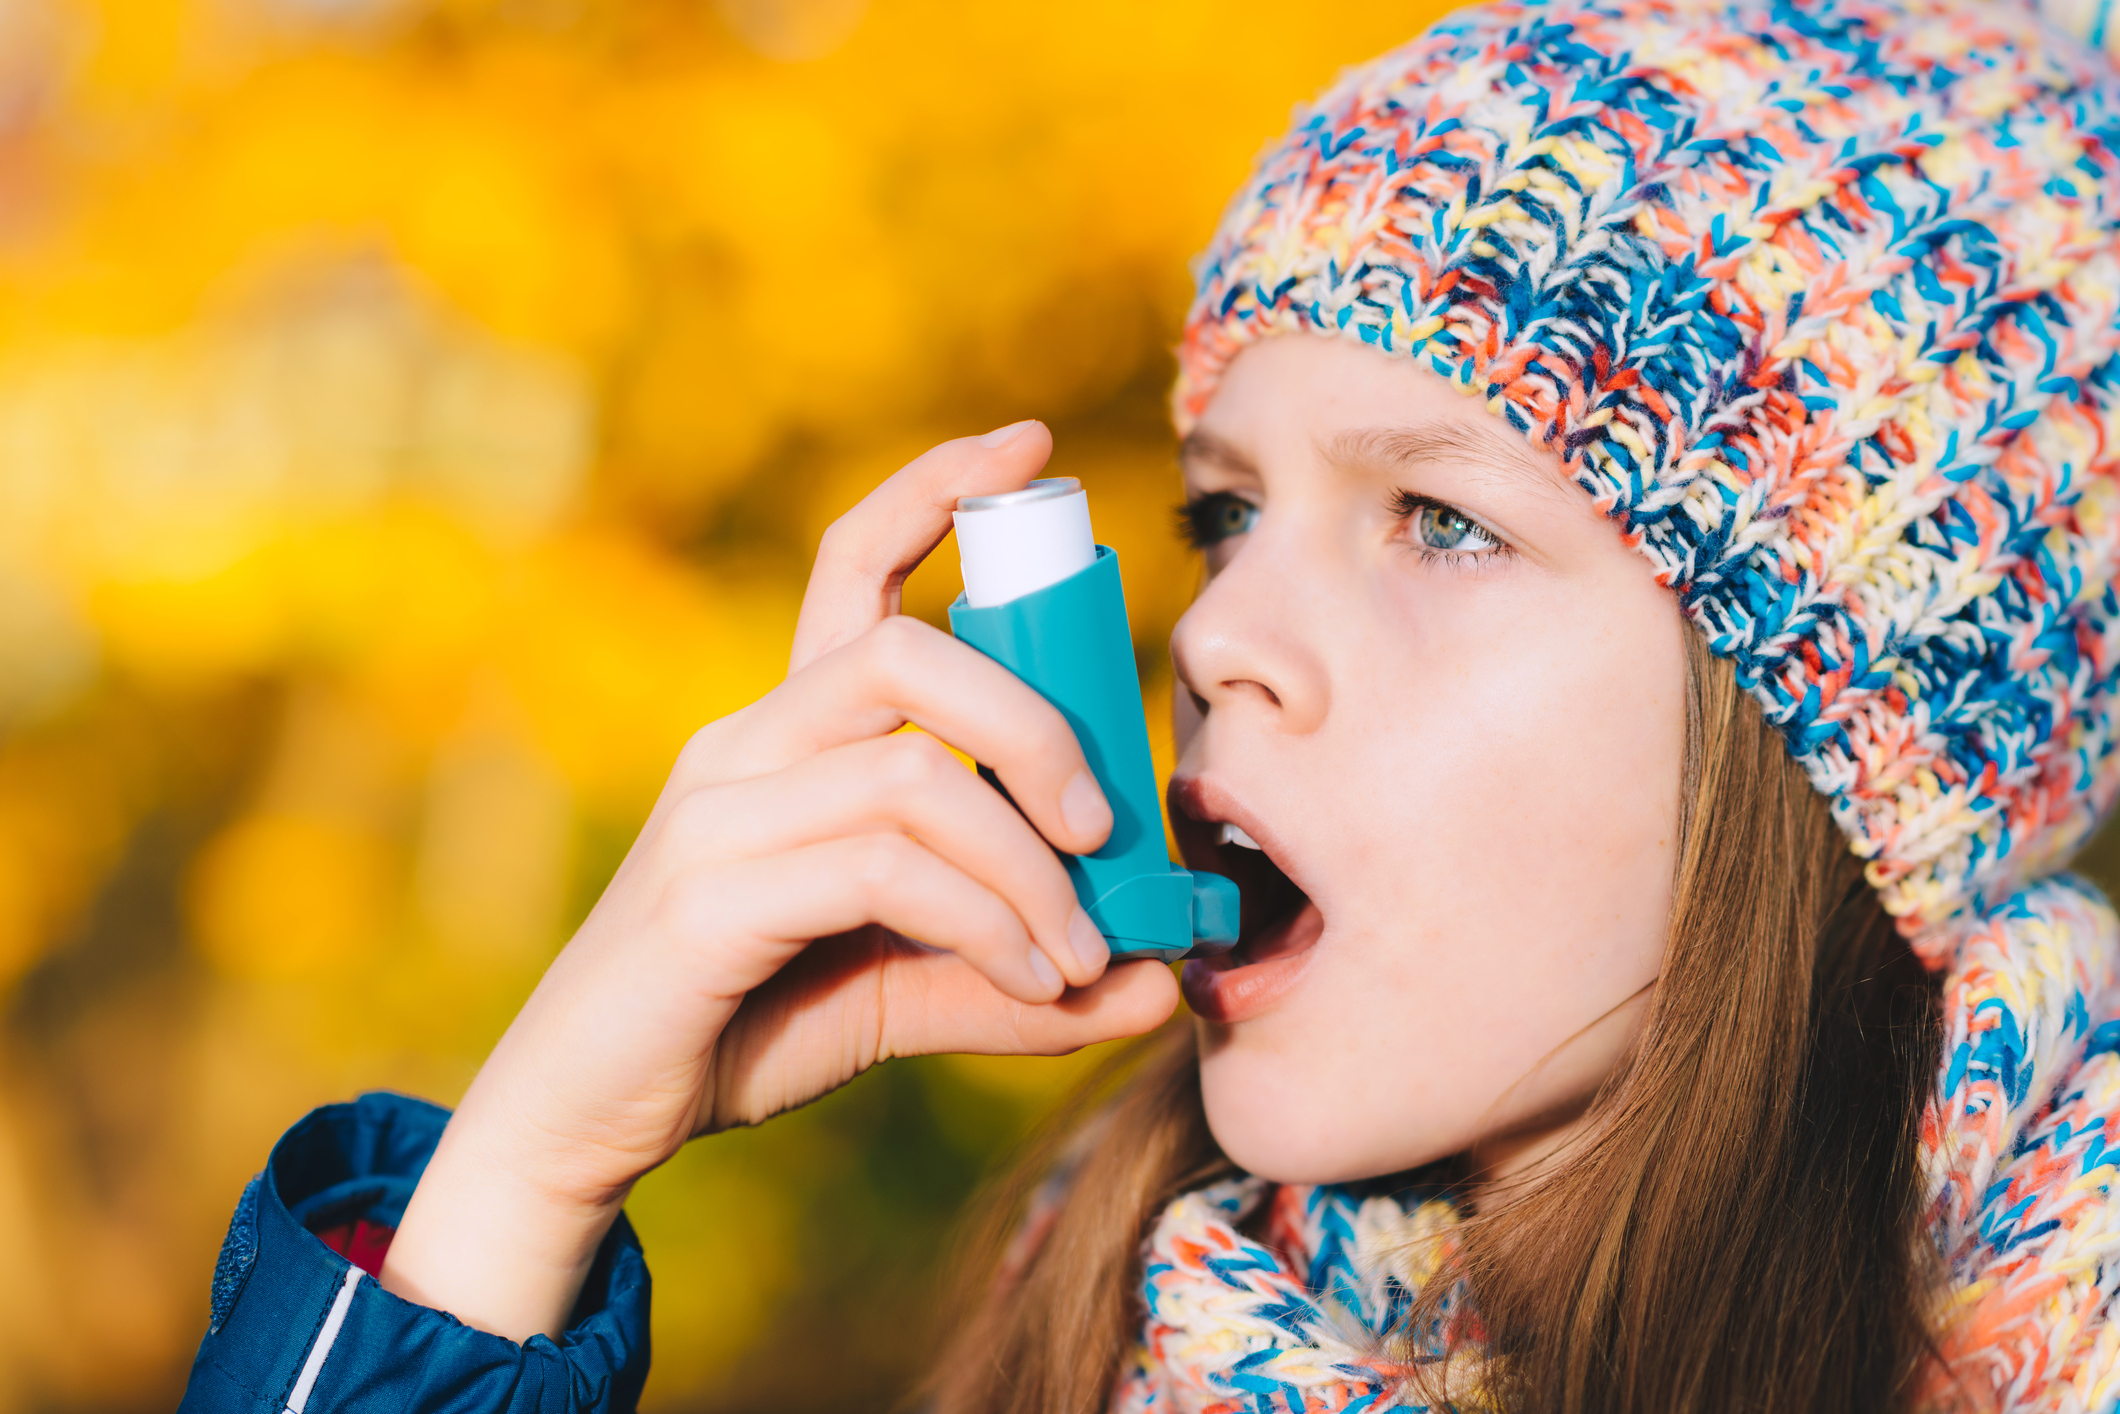 Asthma patient girl inhaling medication for treating shortness of breath and wheezing in a park. Chronic disease control, allergy induced asthma remedy and allergy disease concept